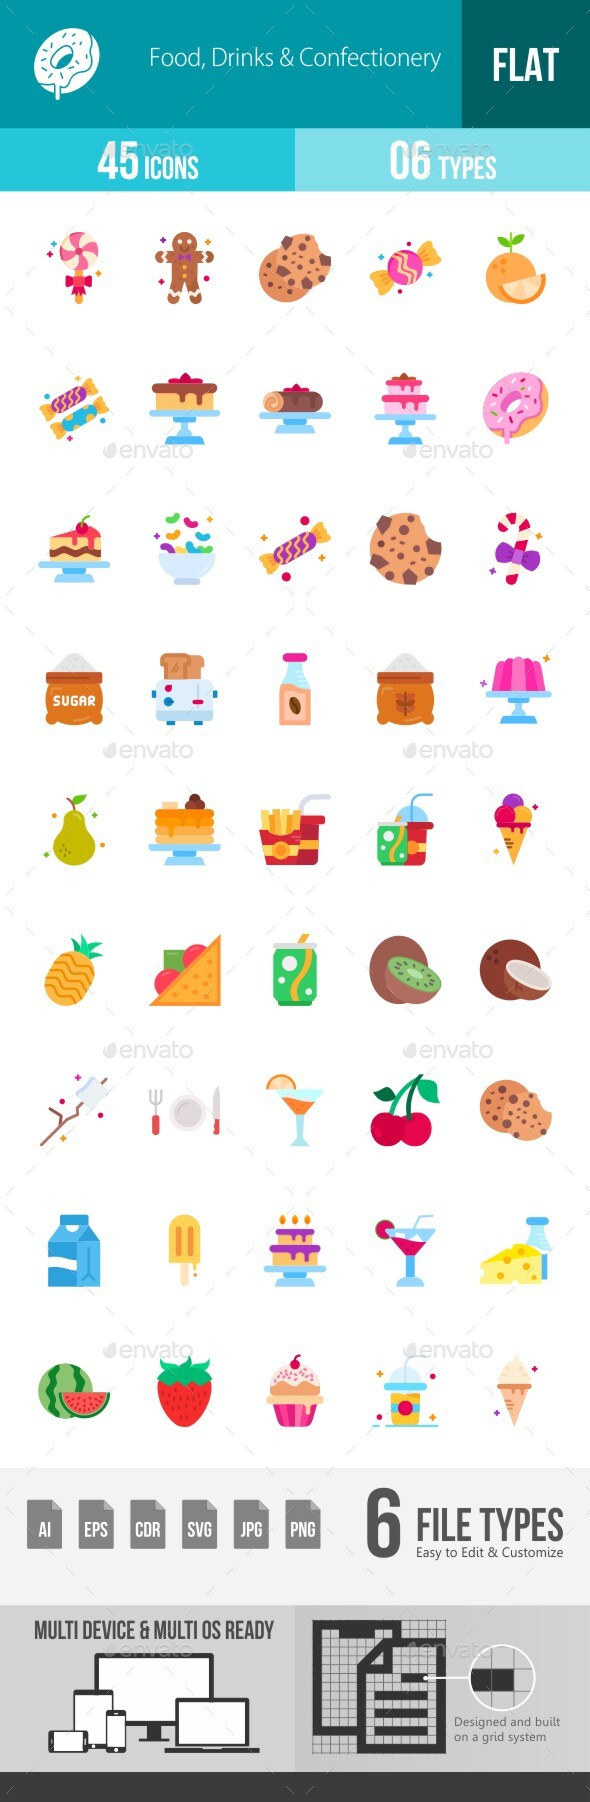 [DOWNLOAD]Food, Drinks & Confectionery Flat Multicolor Icons